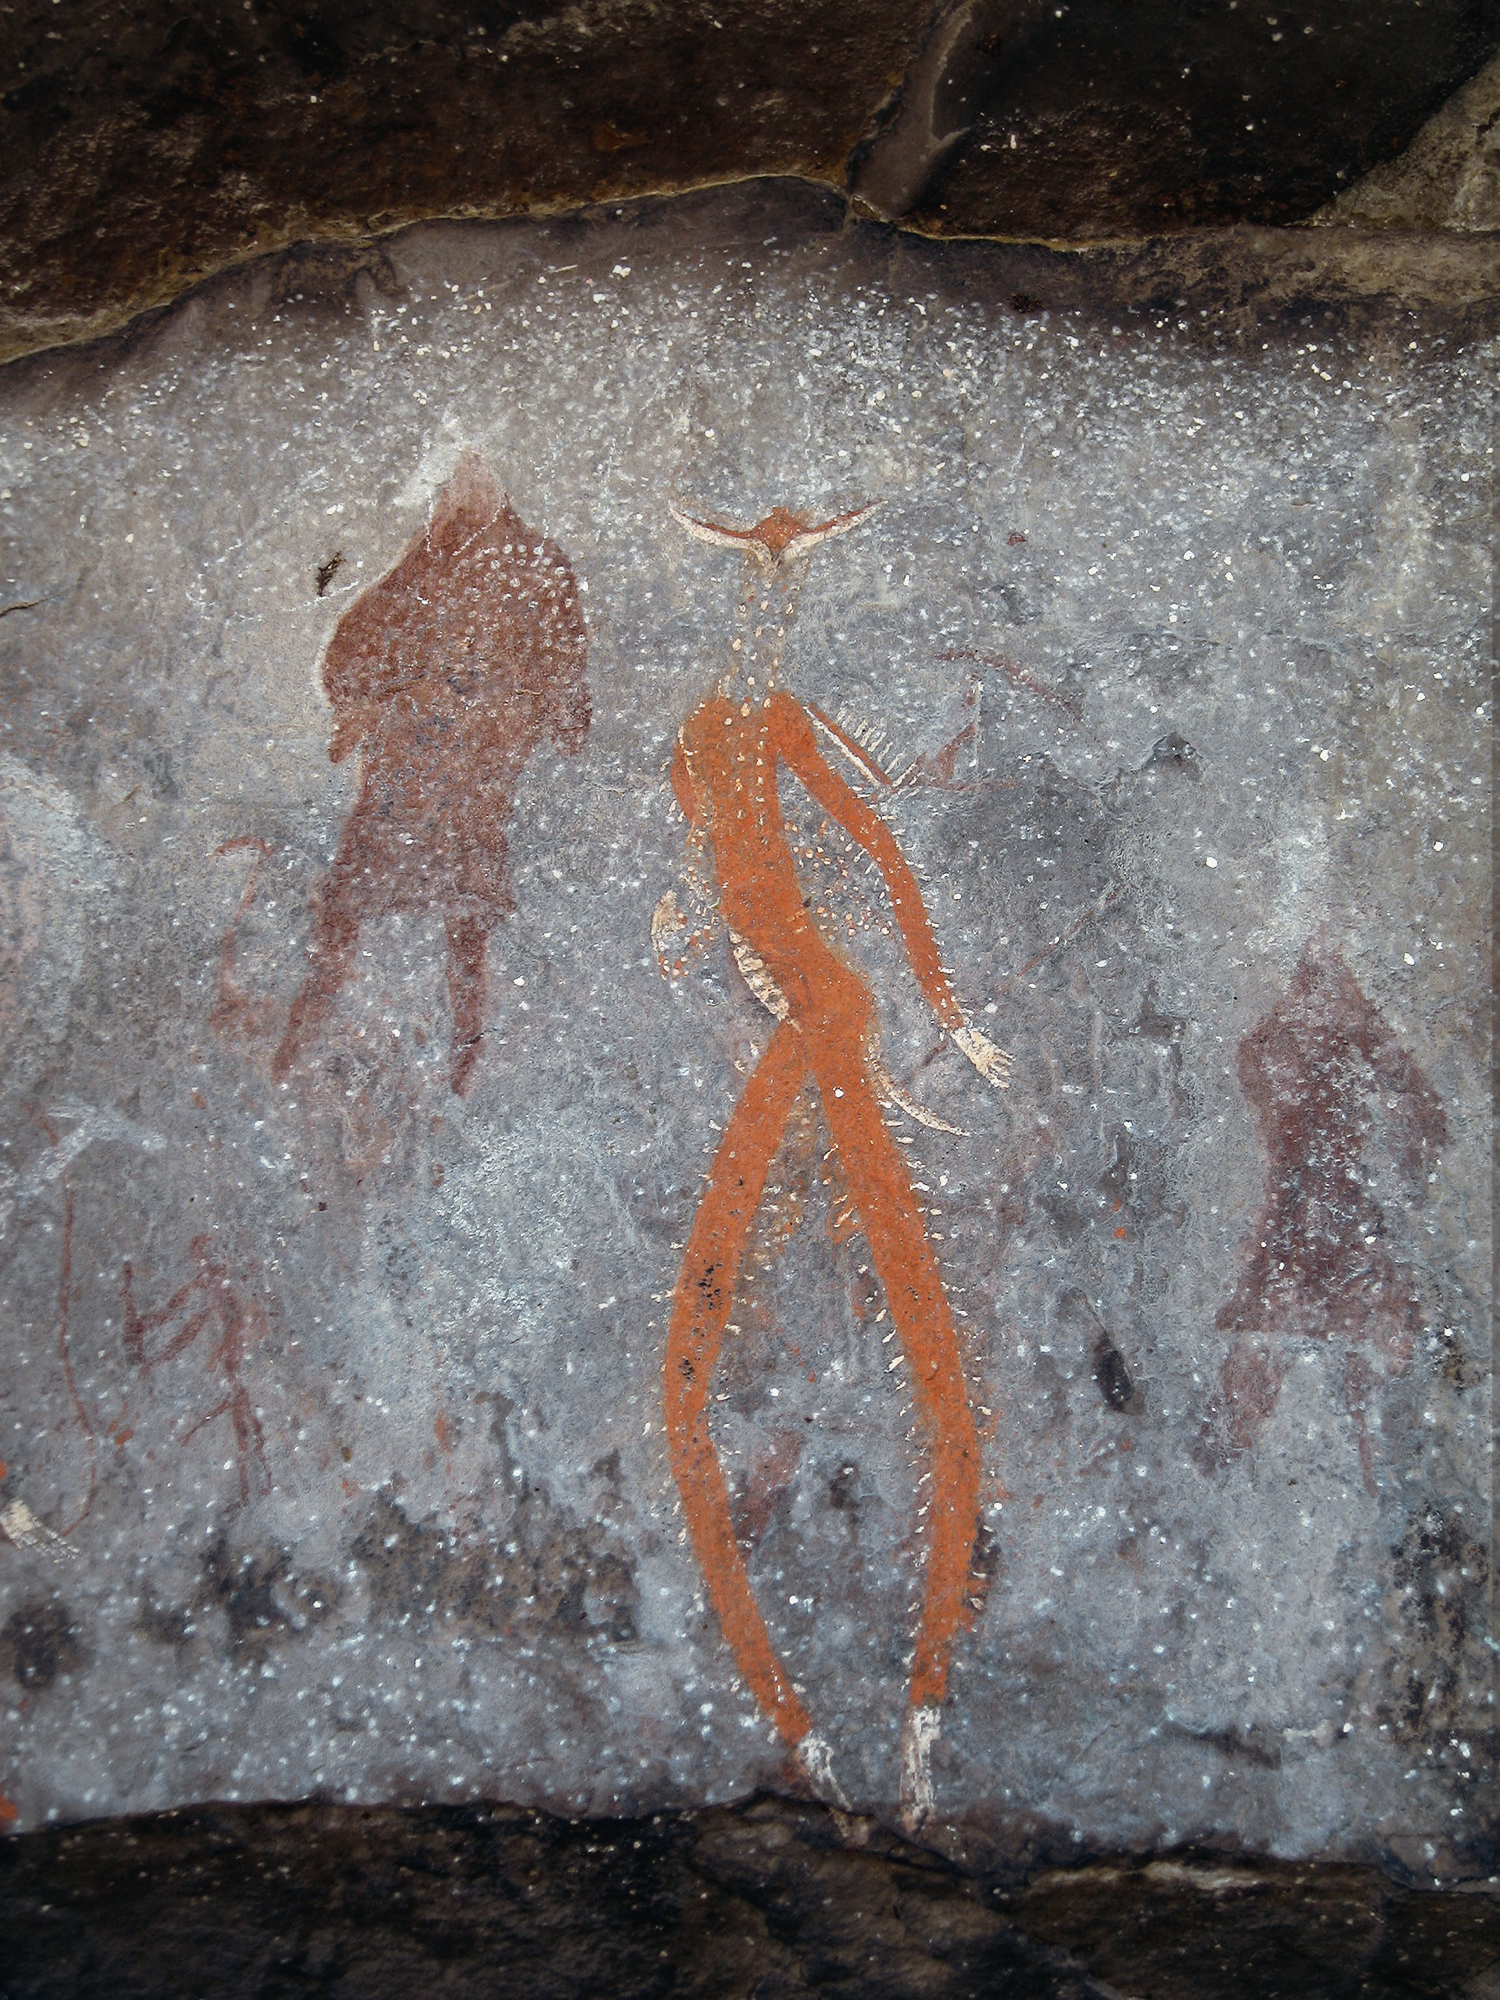 The rock art paintings reflect the San travelling to the spirit realm San Rock Art South Africa